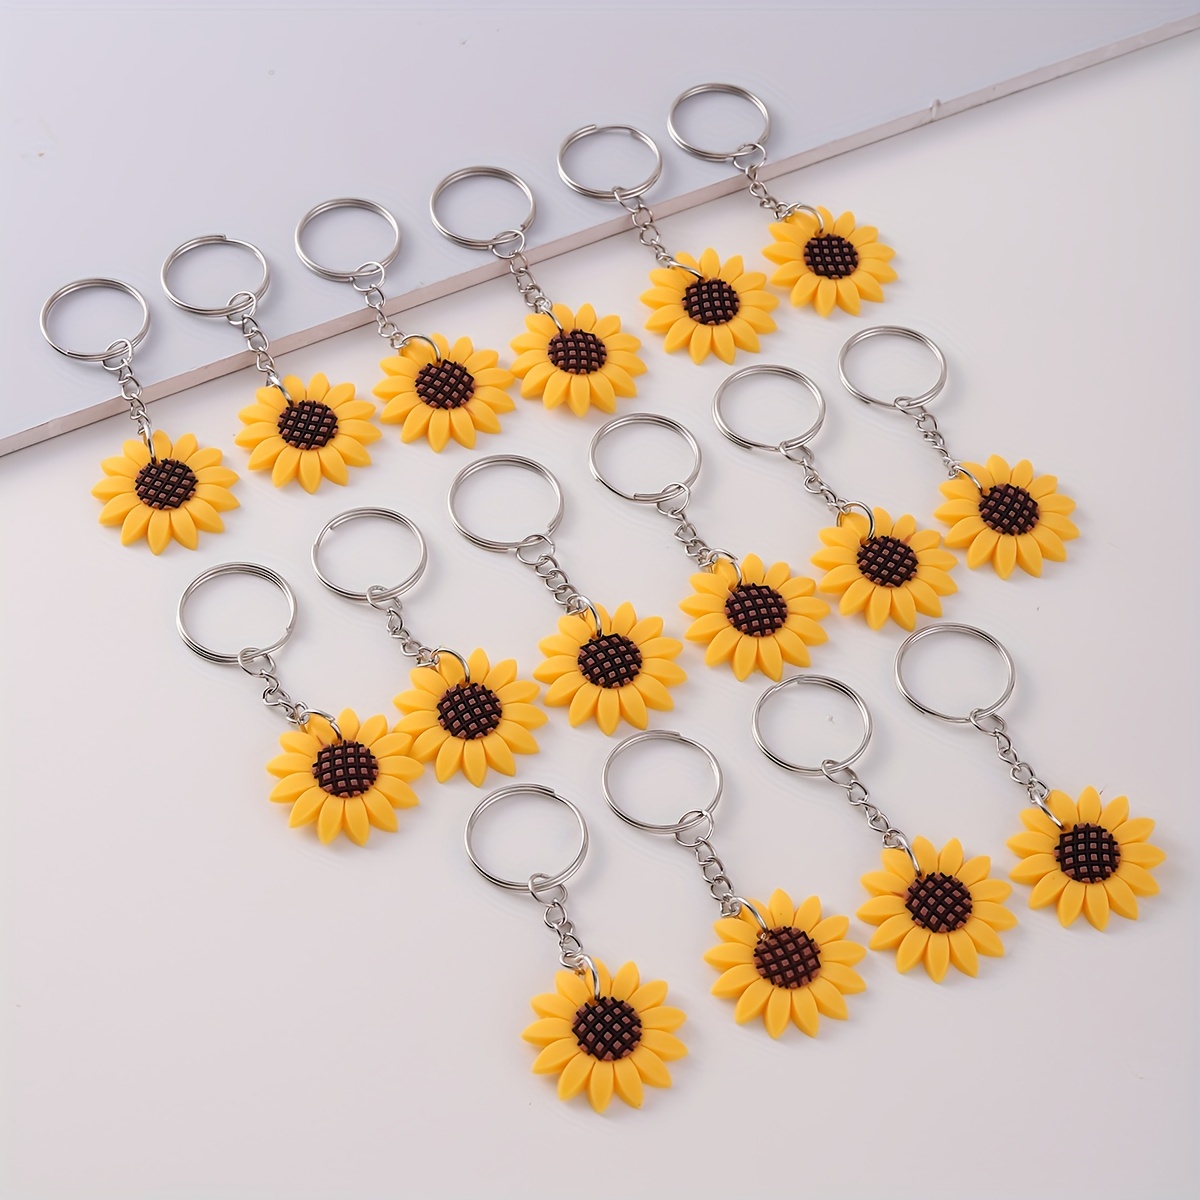 

16pcs Cute Sunflower Keychain Soft Pvc Key Chain Ring Purse Bag Backpack Charm Earbud Case Cover Accessories Party Supplies Gift